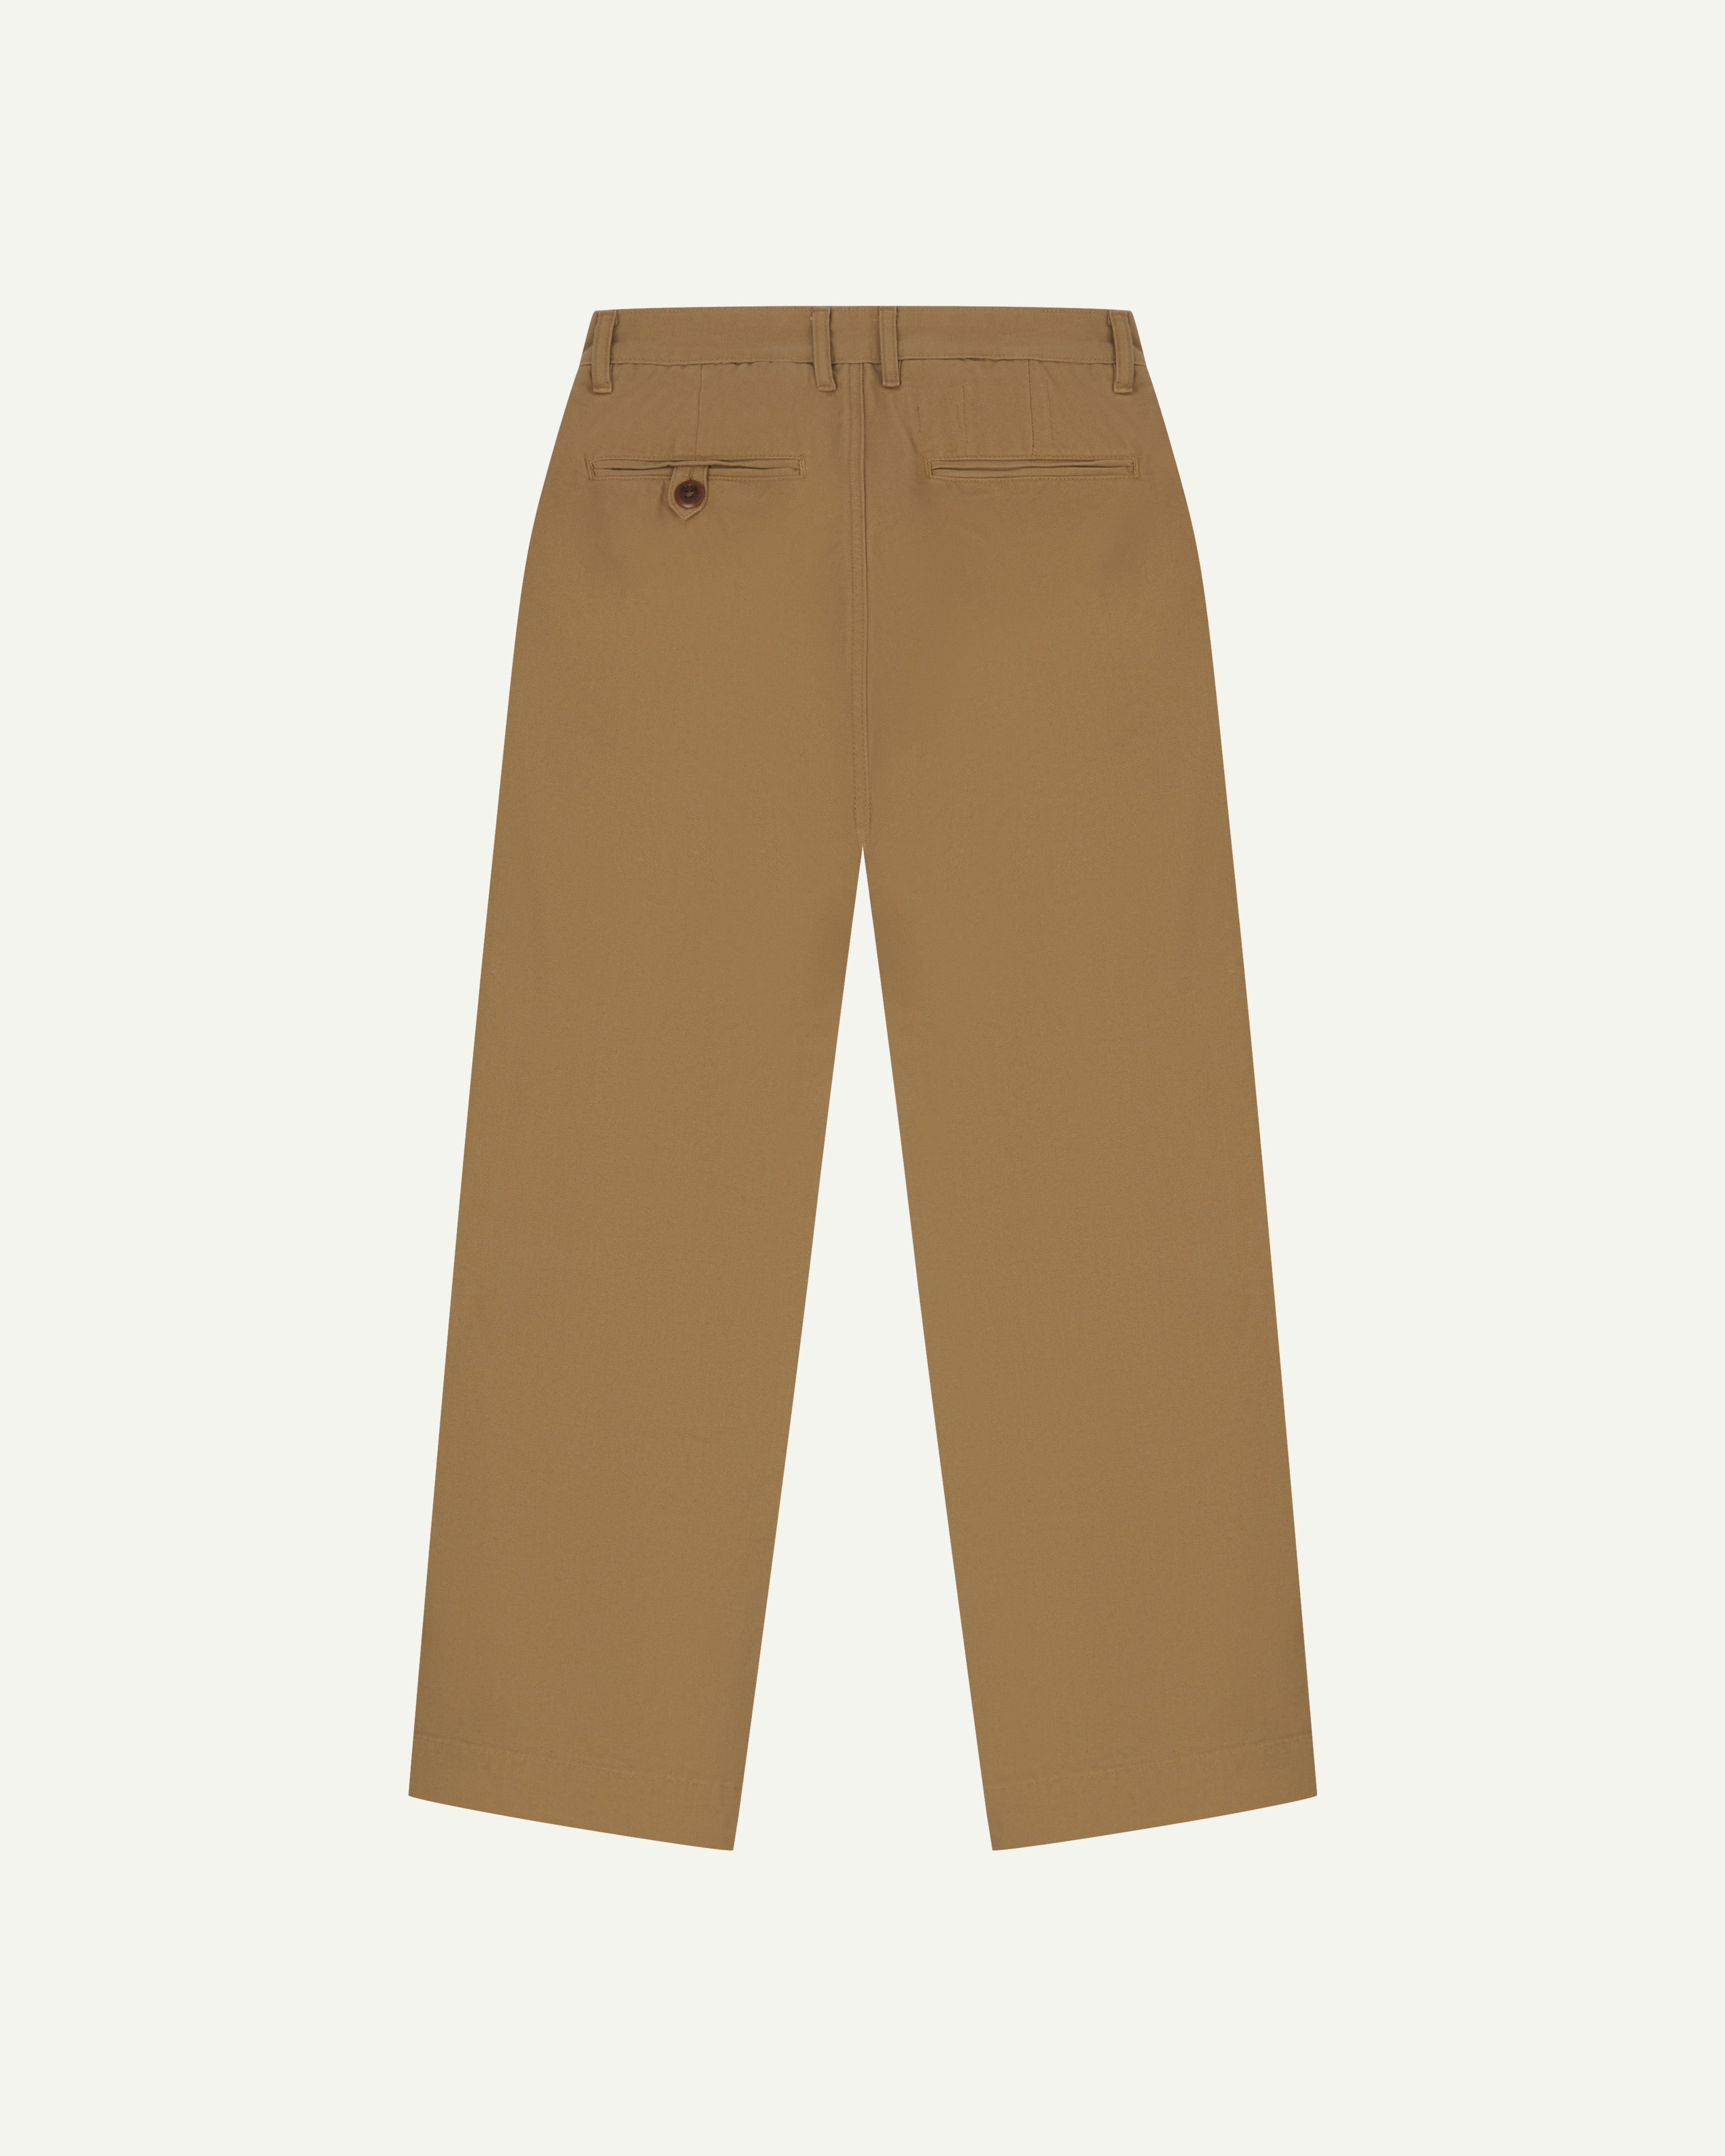 Back view of #5018 Uskees men's organic mid-weight cotton boat trousers in khaki showing wide leg style and buttoned back pocket